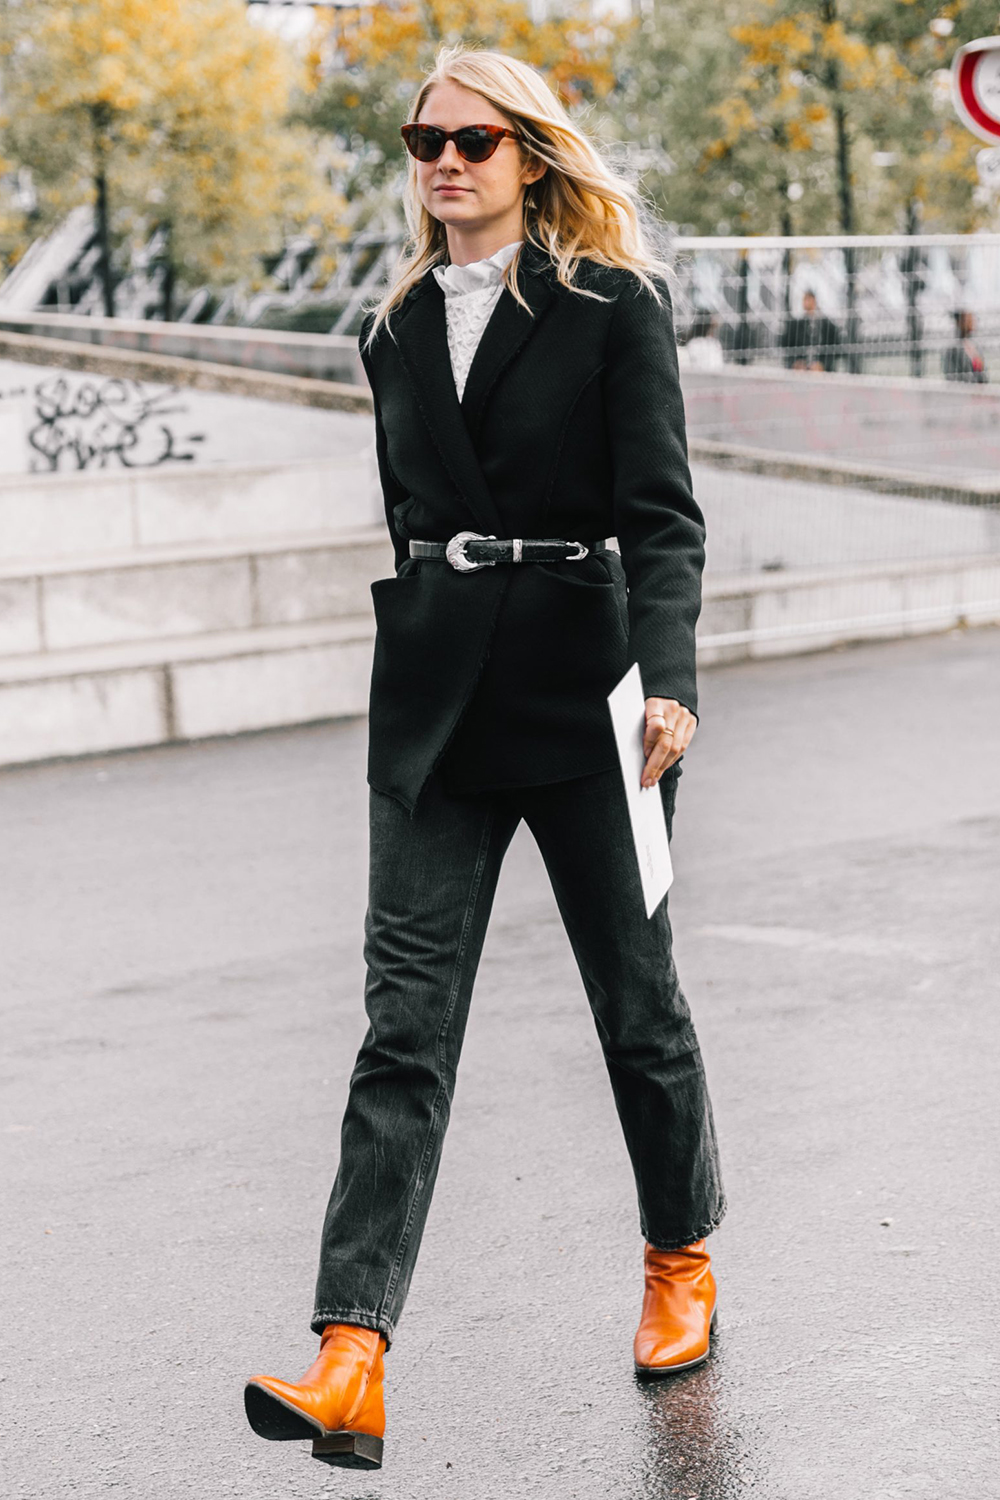 Get Inspired With Our Roundup of All-Black Work Outfits 